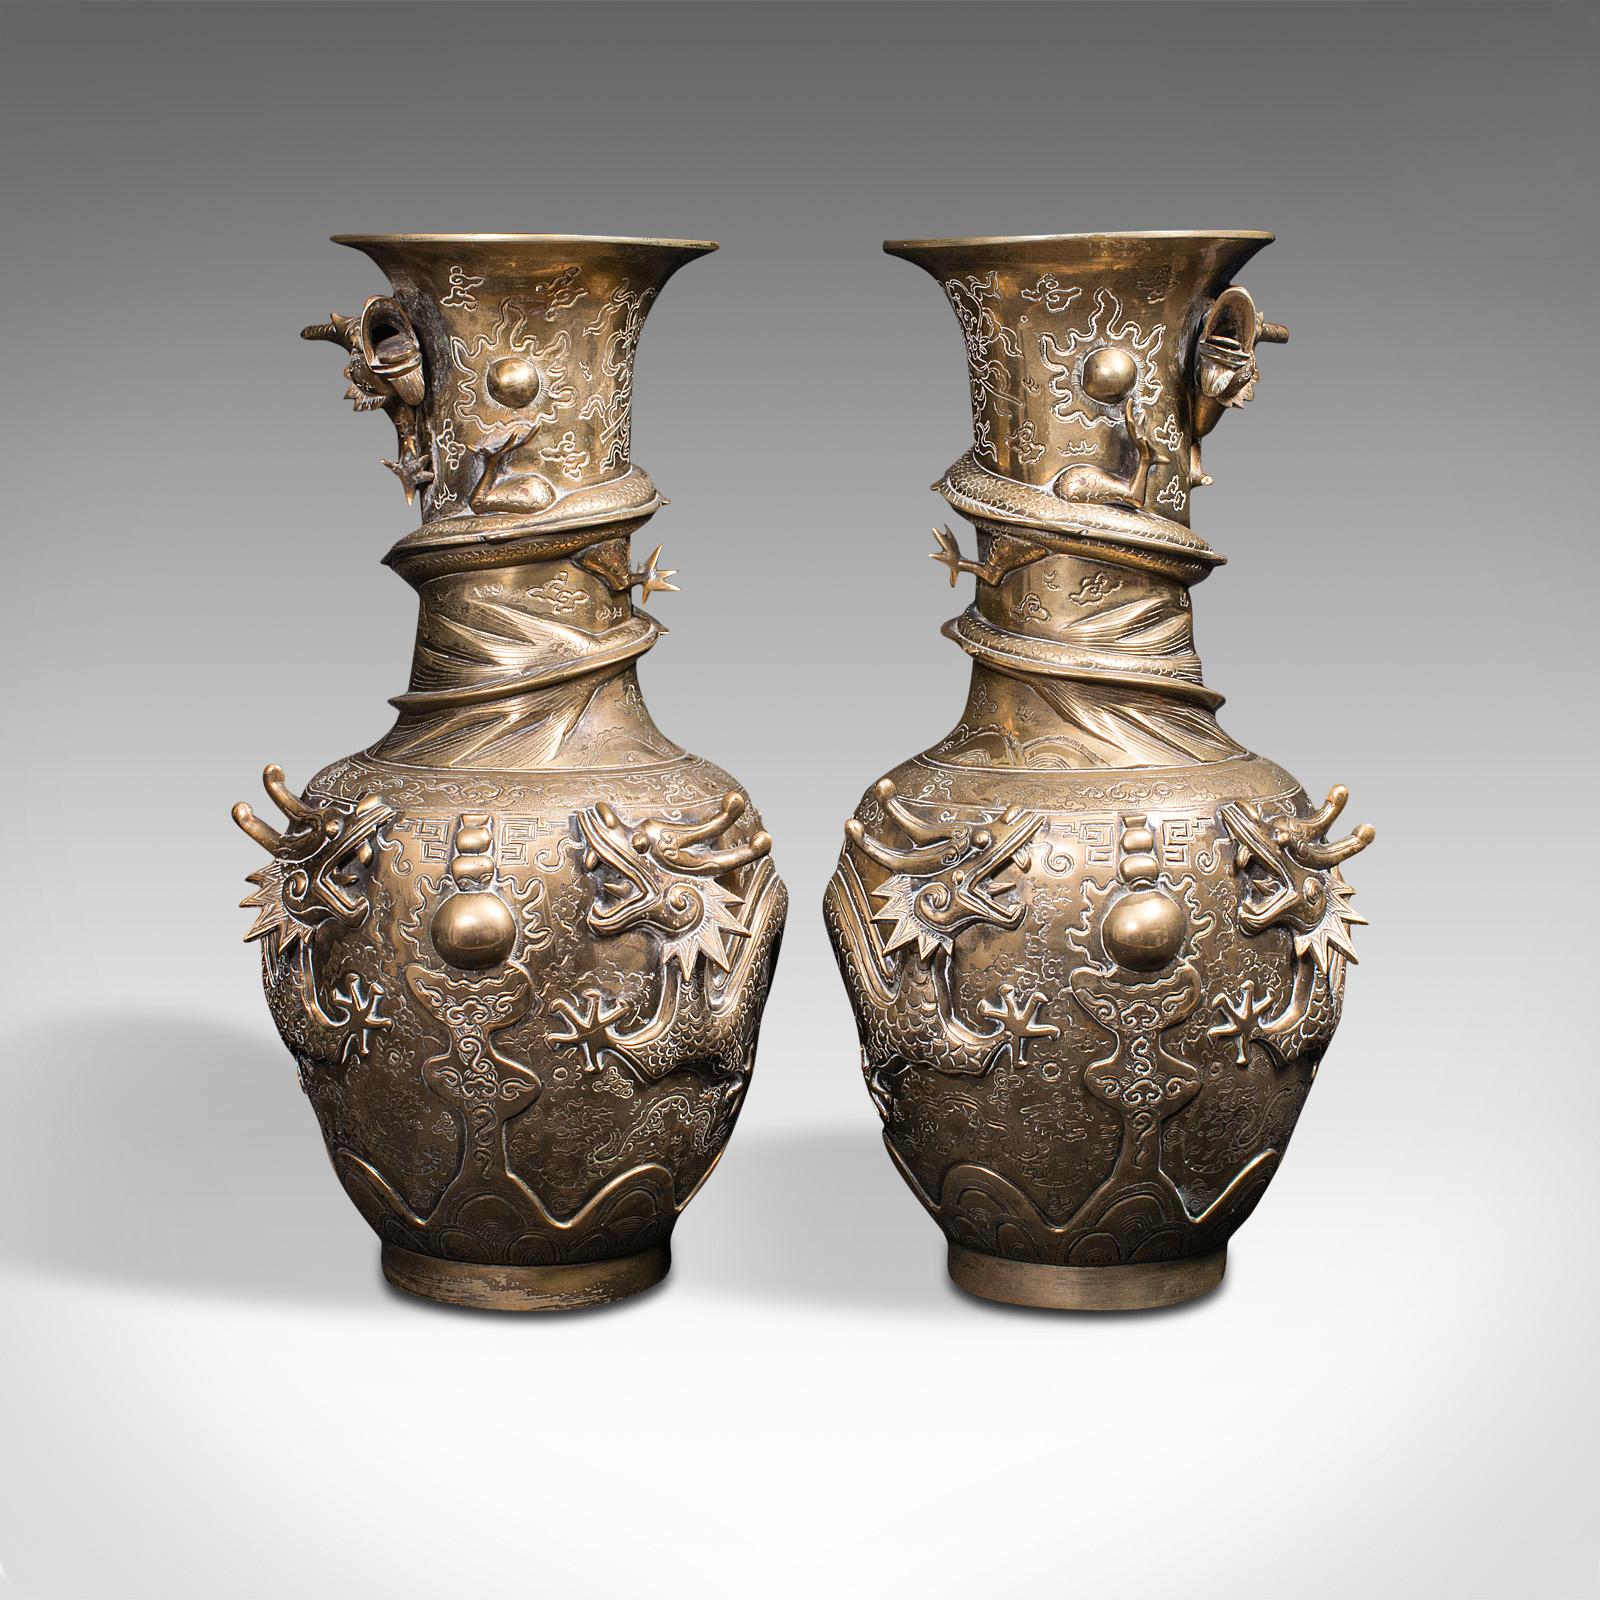 This is a pair of tall antique dragon vases. A Chinese, brass decorative flower urn with strong Oriental taste, dating to the Victorian period, circa 1900.

Strikingly overt in detail and iconography
Displays a desirable aged patina